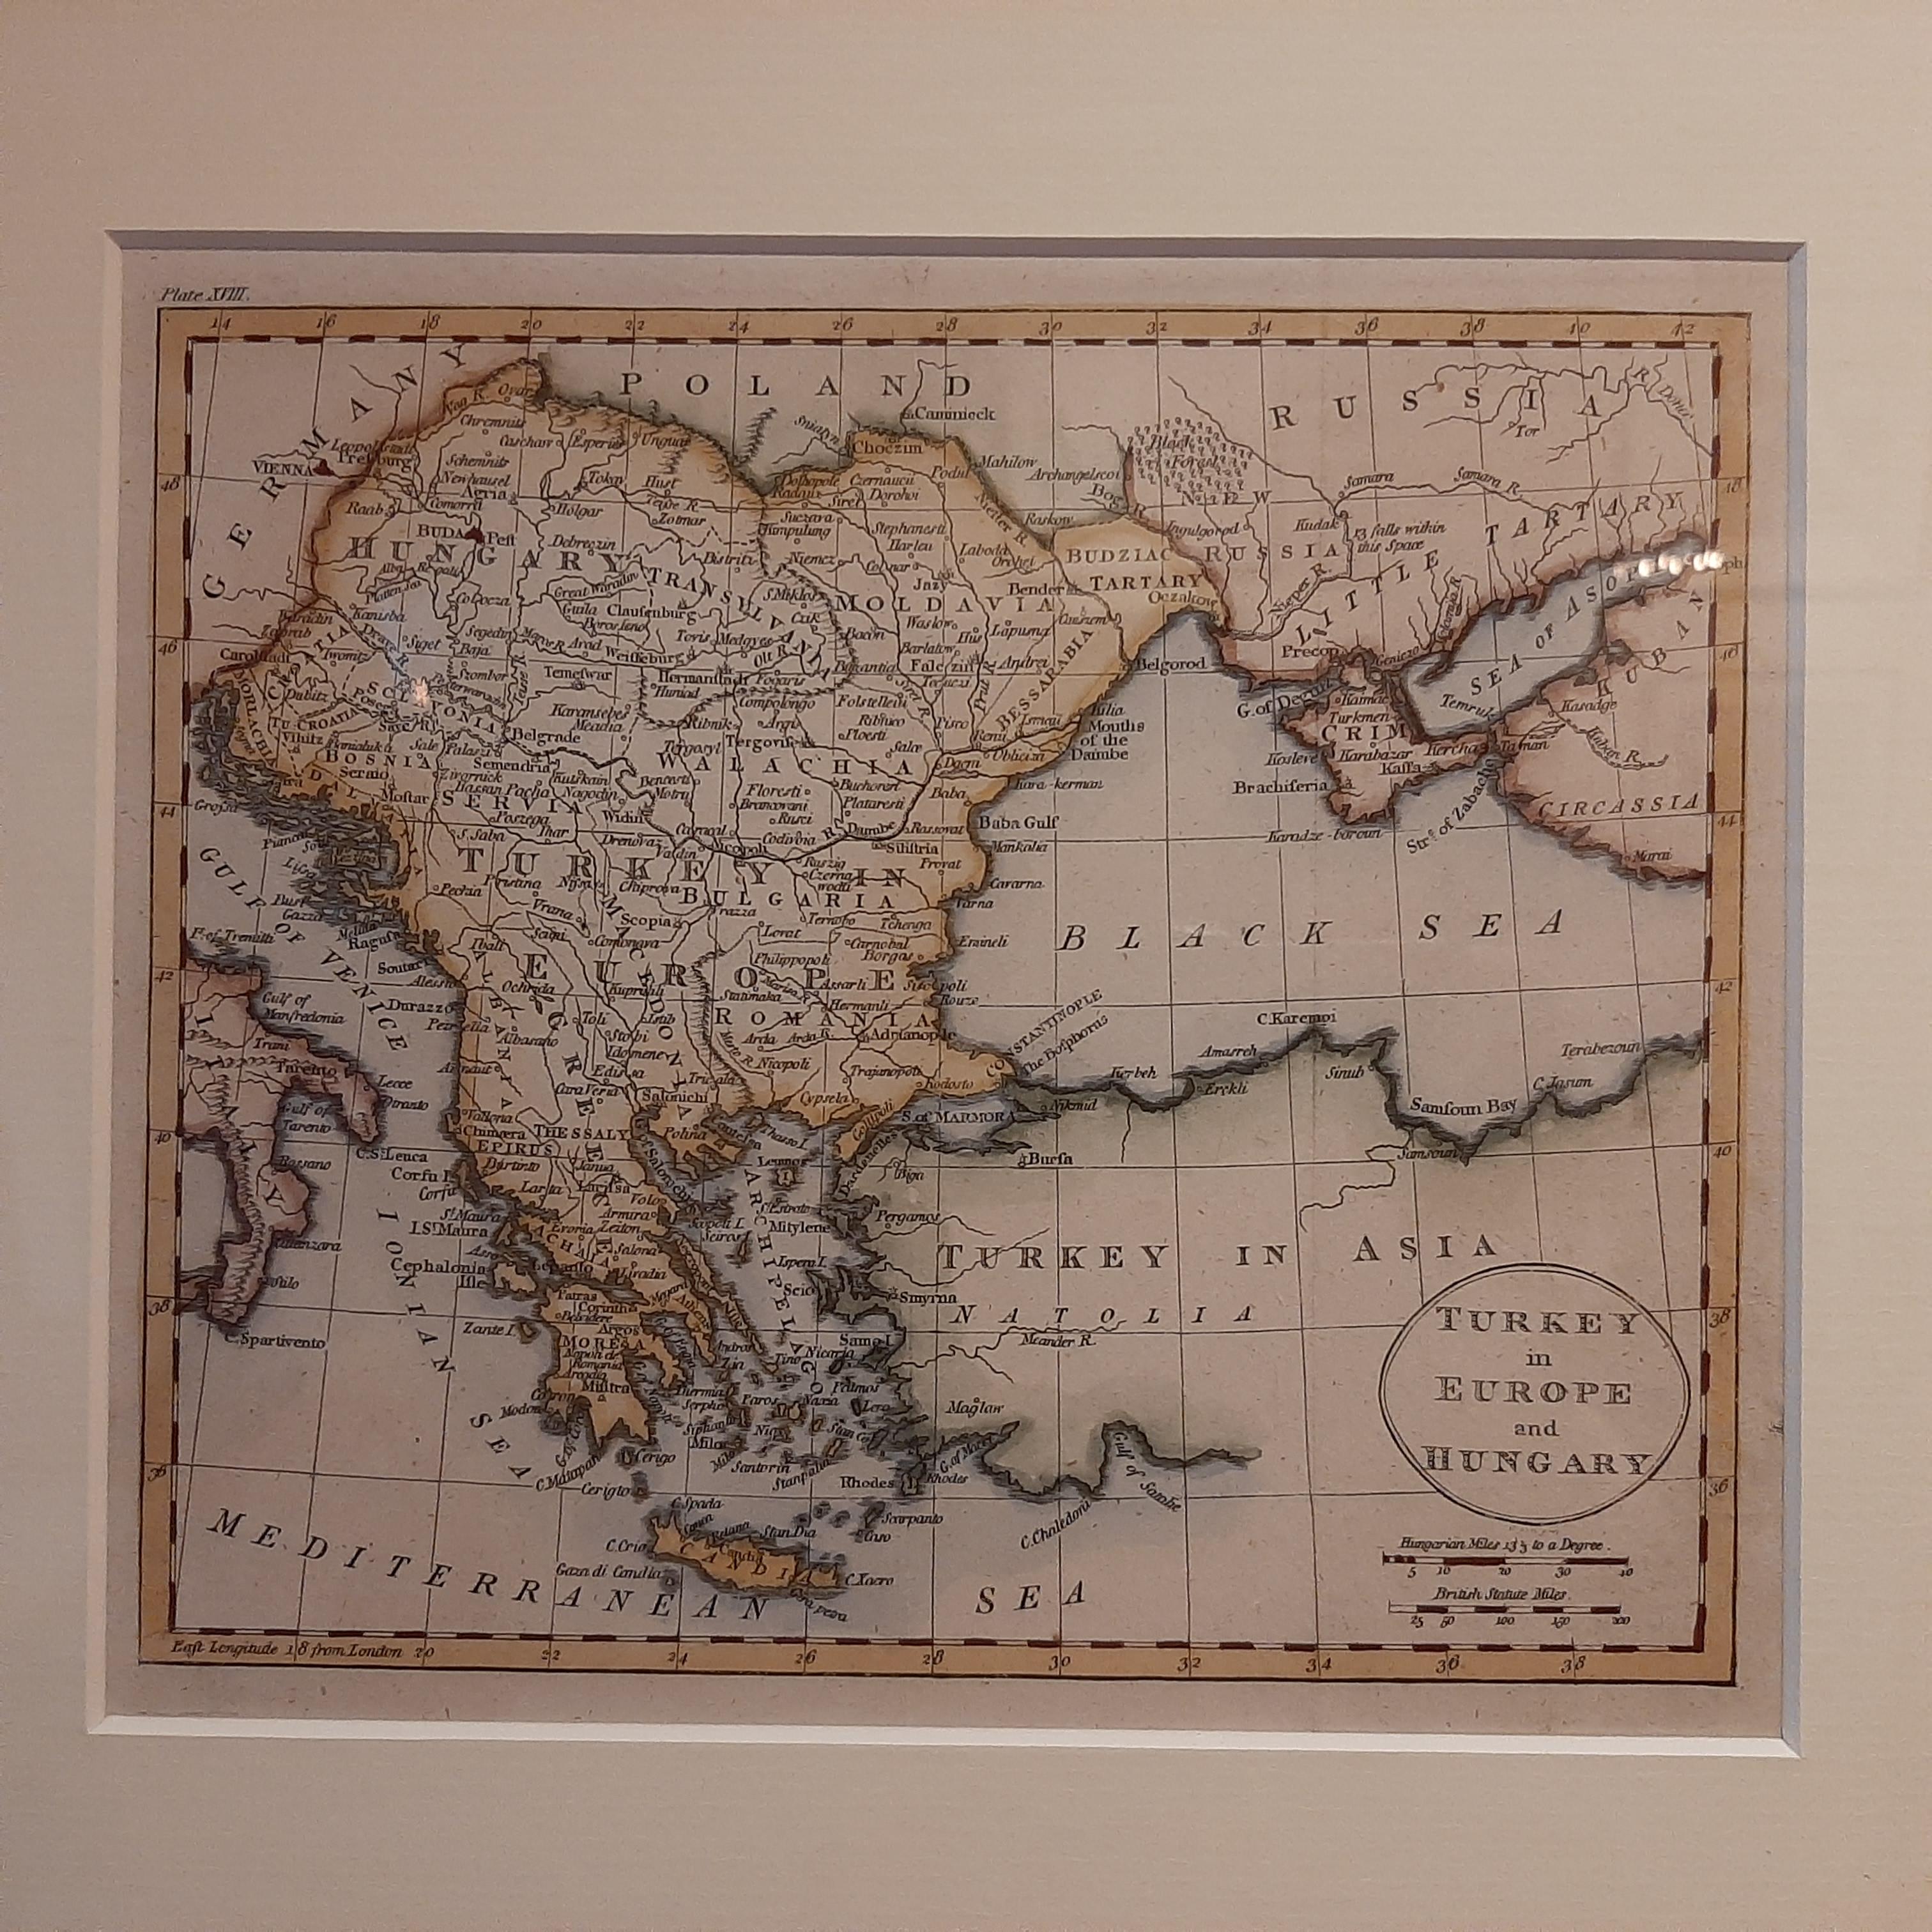 Antique map titled 'Turkey in Europe and Hungary'. Original map of Turkey in Europe. Covers present day Northern Turkey, Greece, Albania, Romania, Hungary, Croatia, Bosnia Herzogovina, etc. This map originates from 'A New Geographical, Historical &